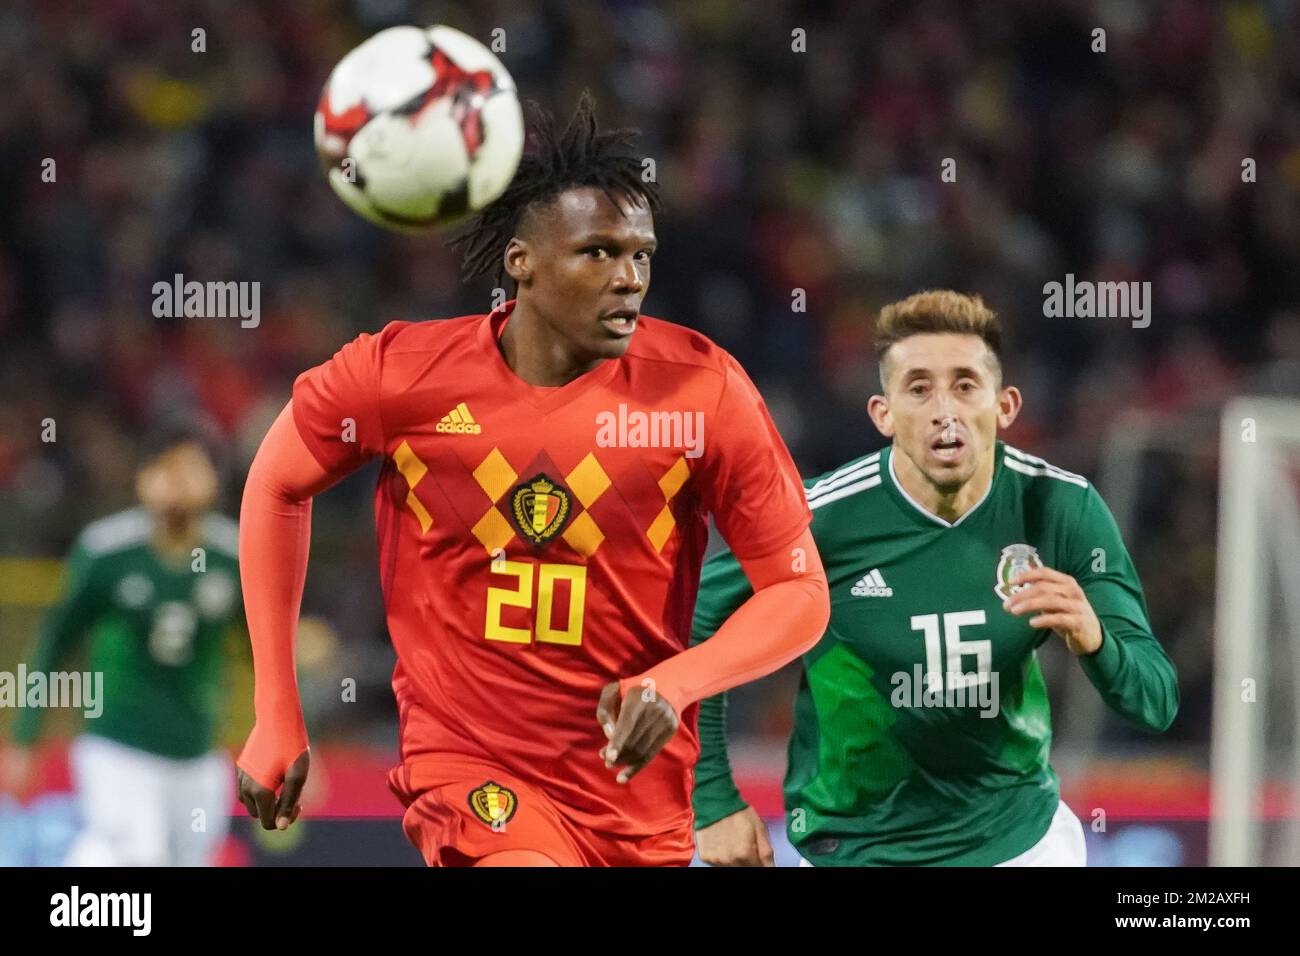 Belgium's Dedryck Boyata and Mexico's Hector Herrera fight for the ball during a friendly soccer game between Belgian national team Red Devils and Mexico, Friday 10 November 2017, in Brussels. BELGA PHOTO BRUNO FAHY Stock Photo